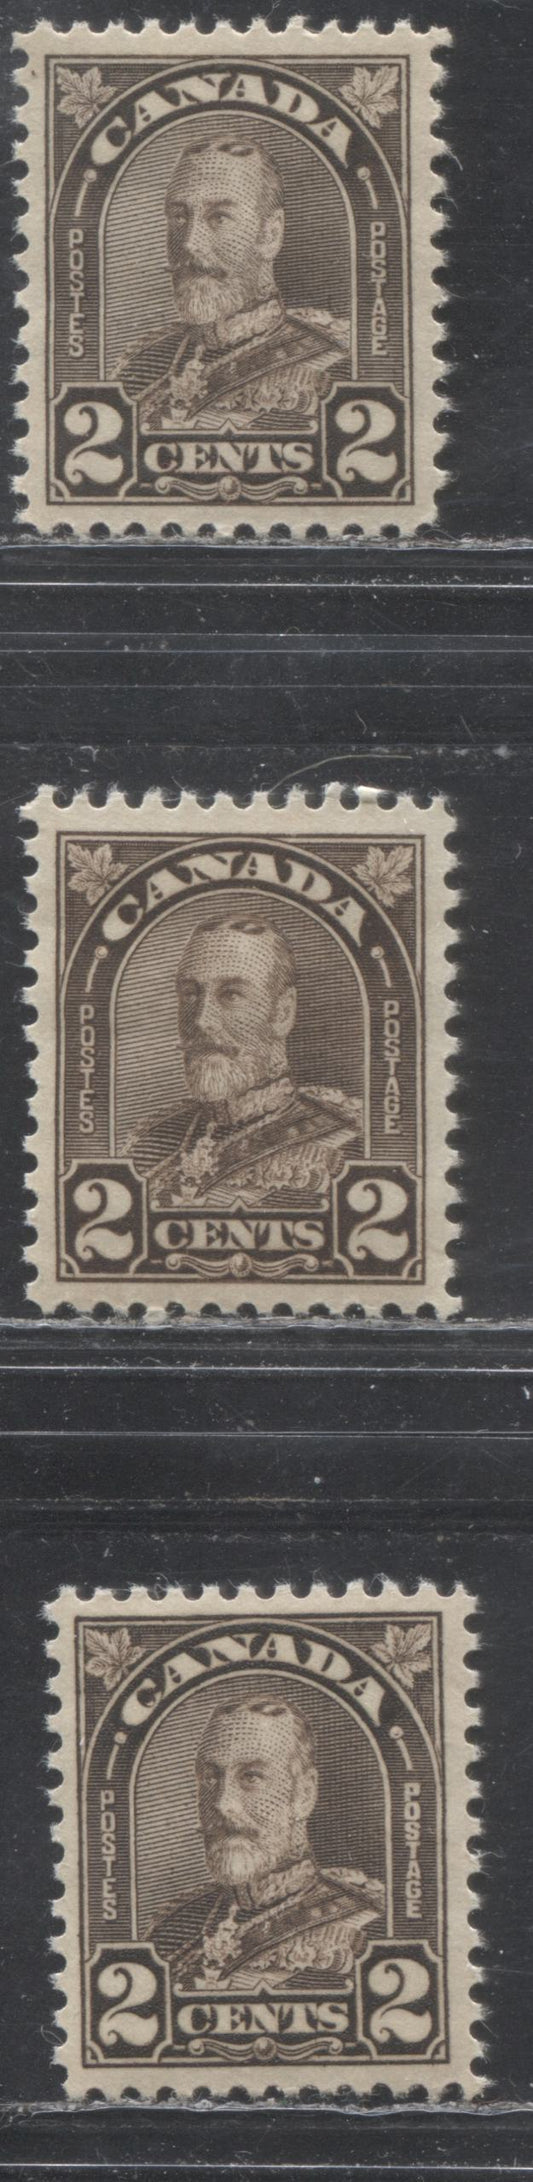 Lot 262 Canada #166-b 2c Dark Brown King George V, 1930-1931 Arch/Leaf Issue, 3 VFNH Singles Showing Additional Shades, Dies 1 and 2